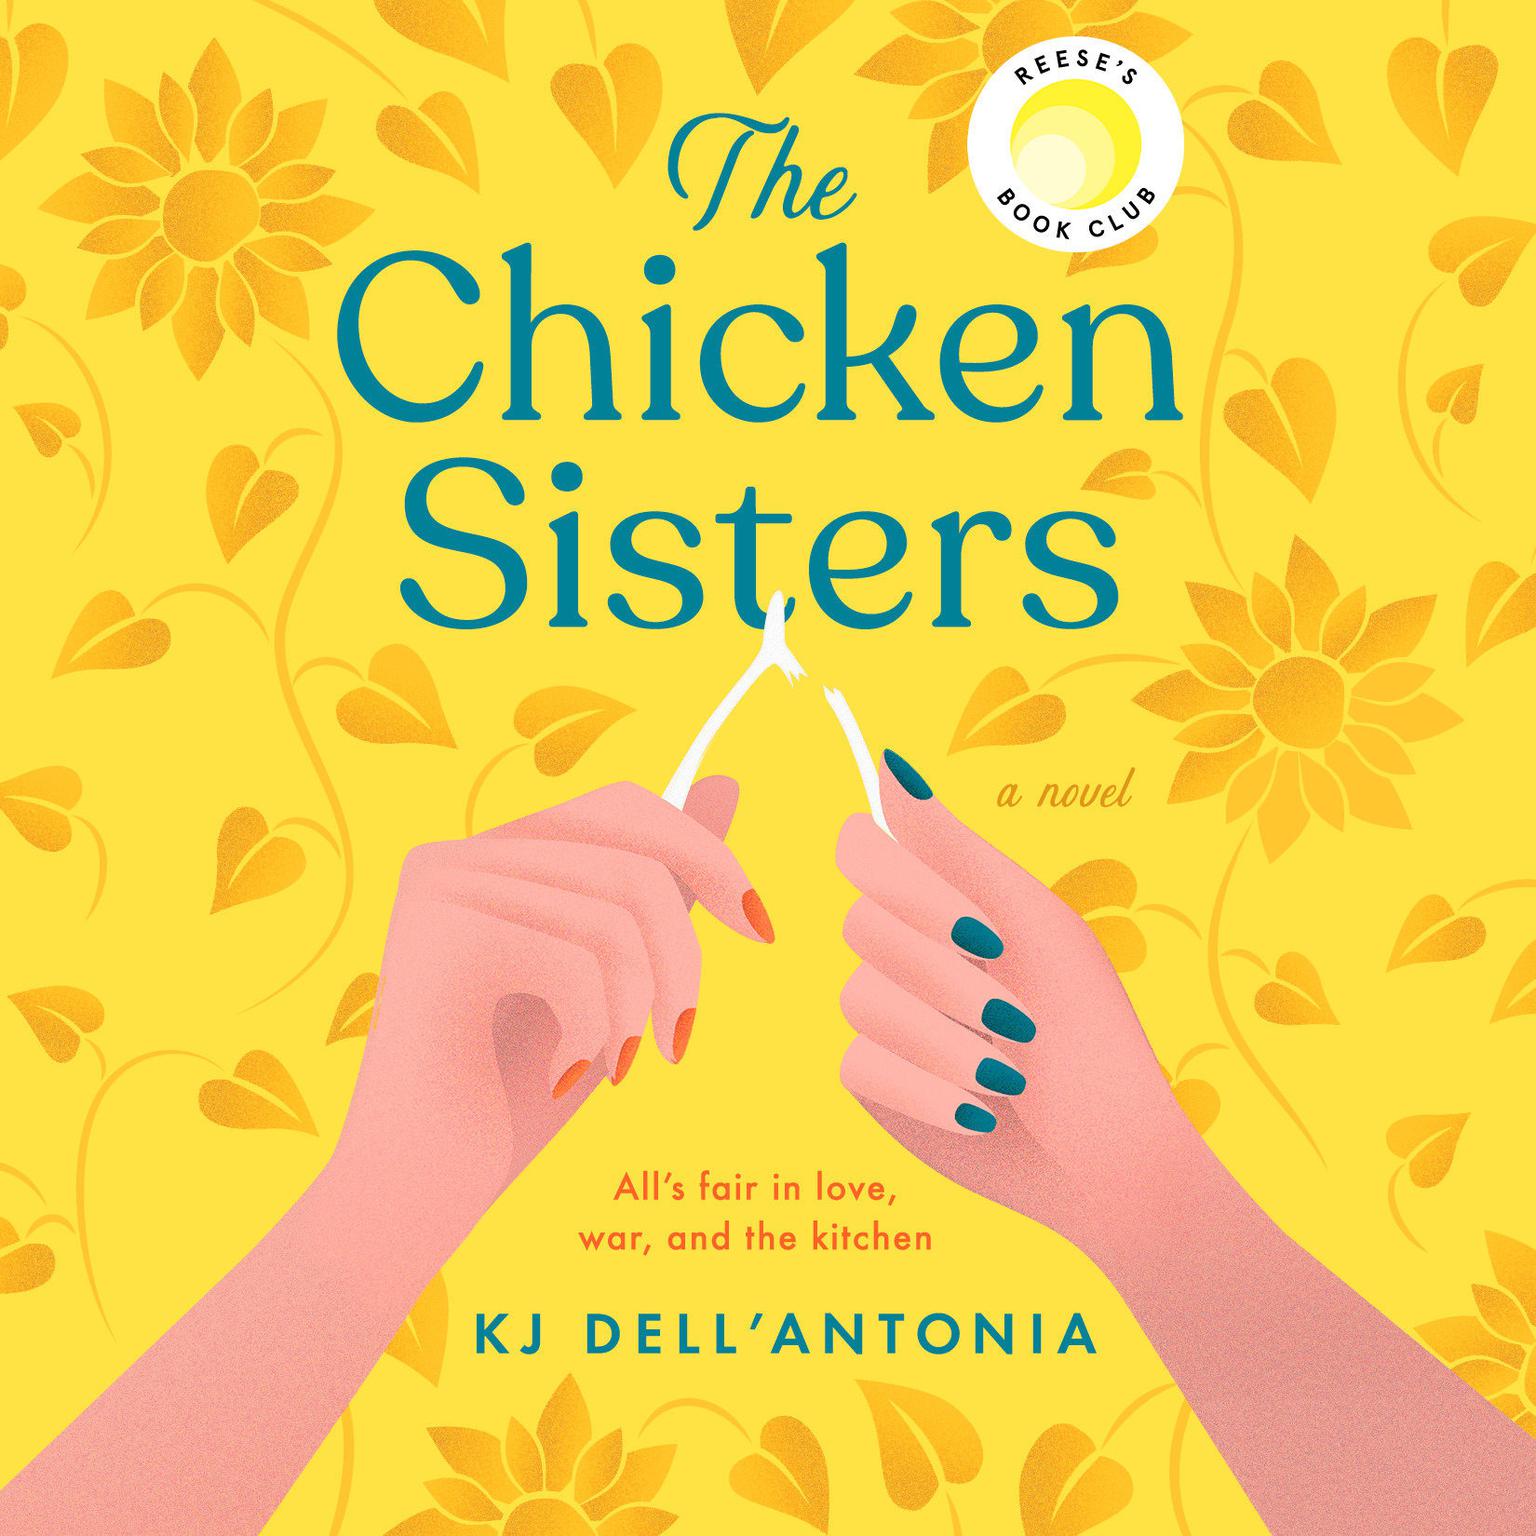 The Chicken Sisters: Reeses Book Club (A Novel) Audiobook, by KJ Dell'Antonia